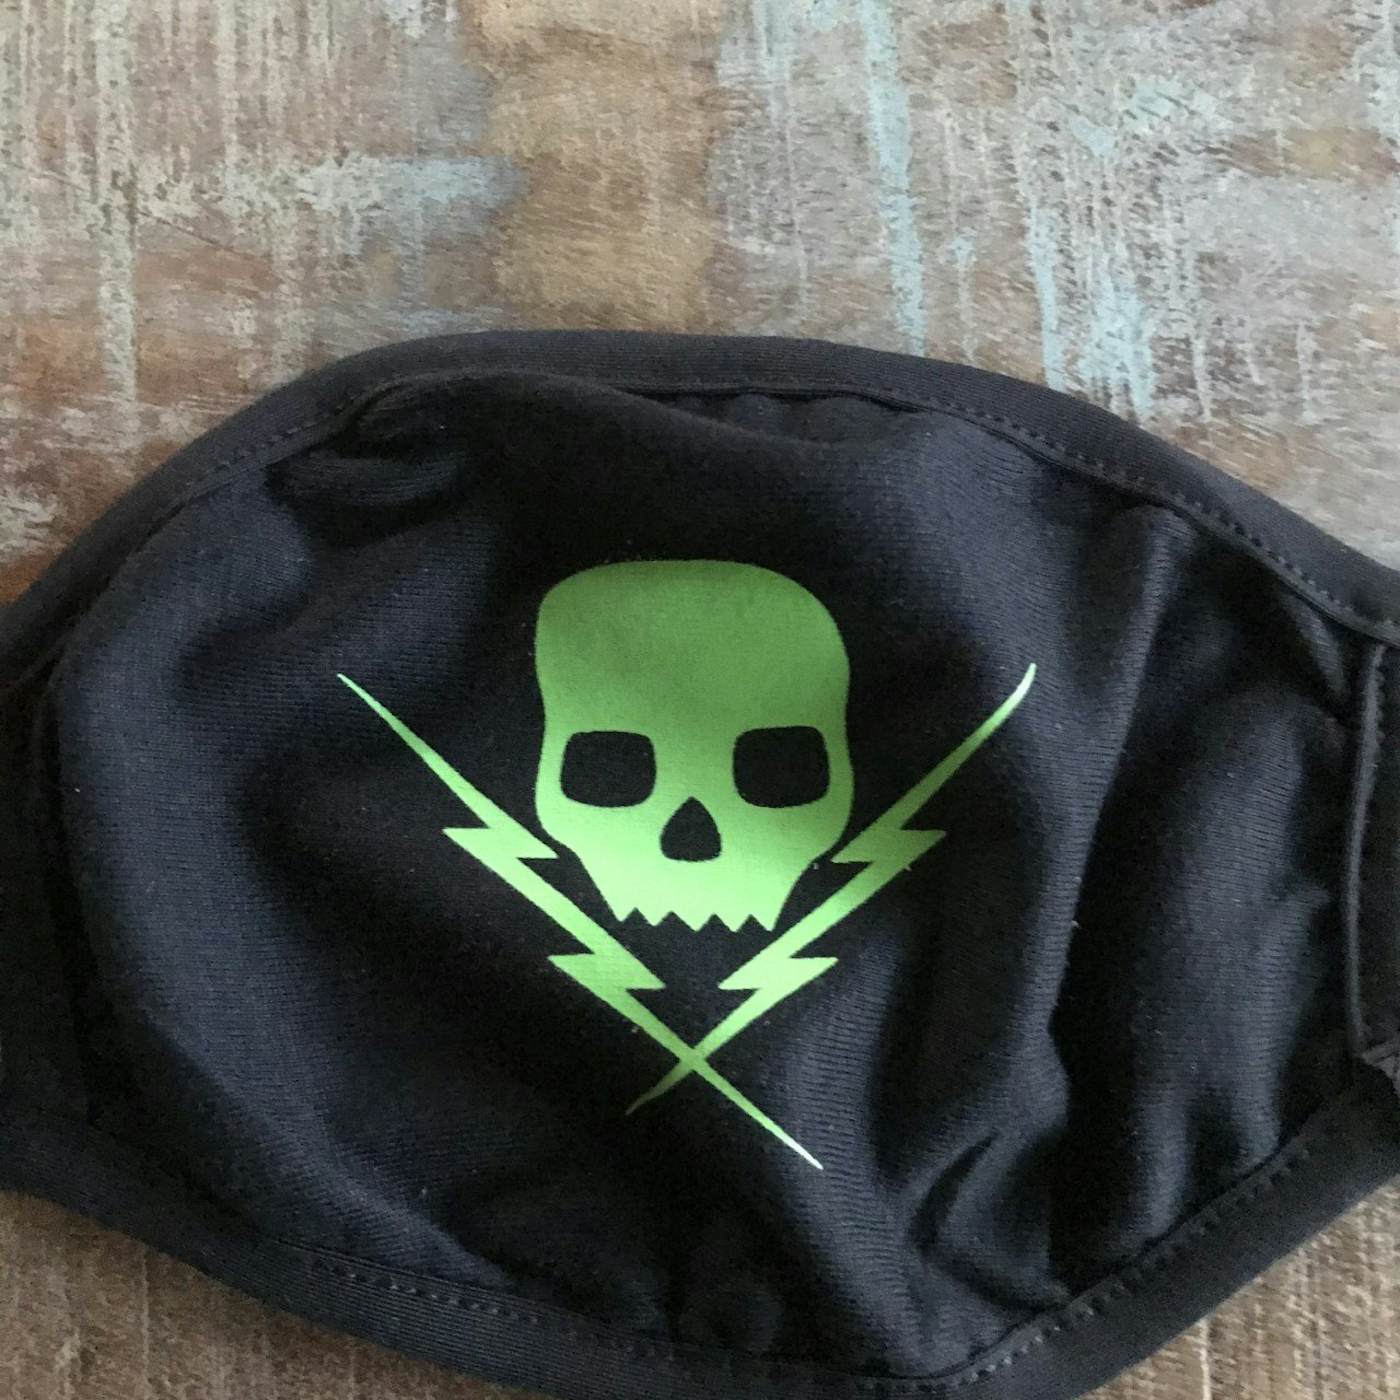 Death By Stereo "Logo" Mask